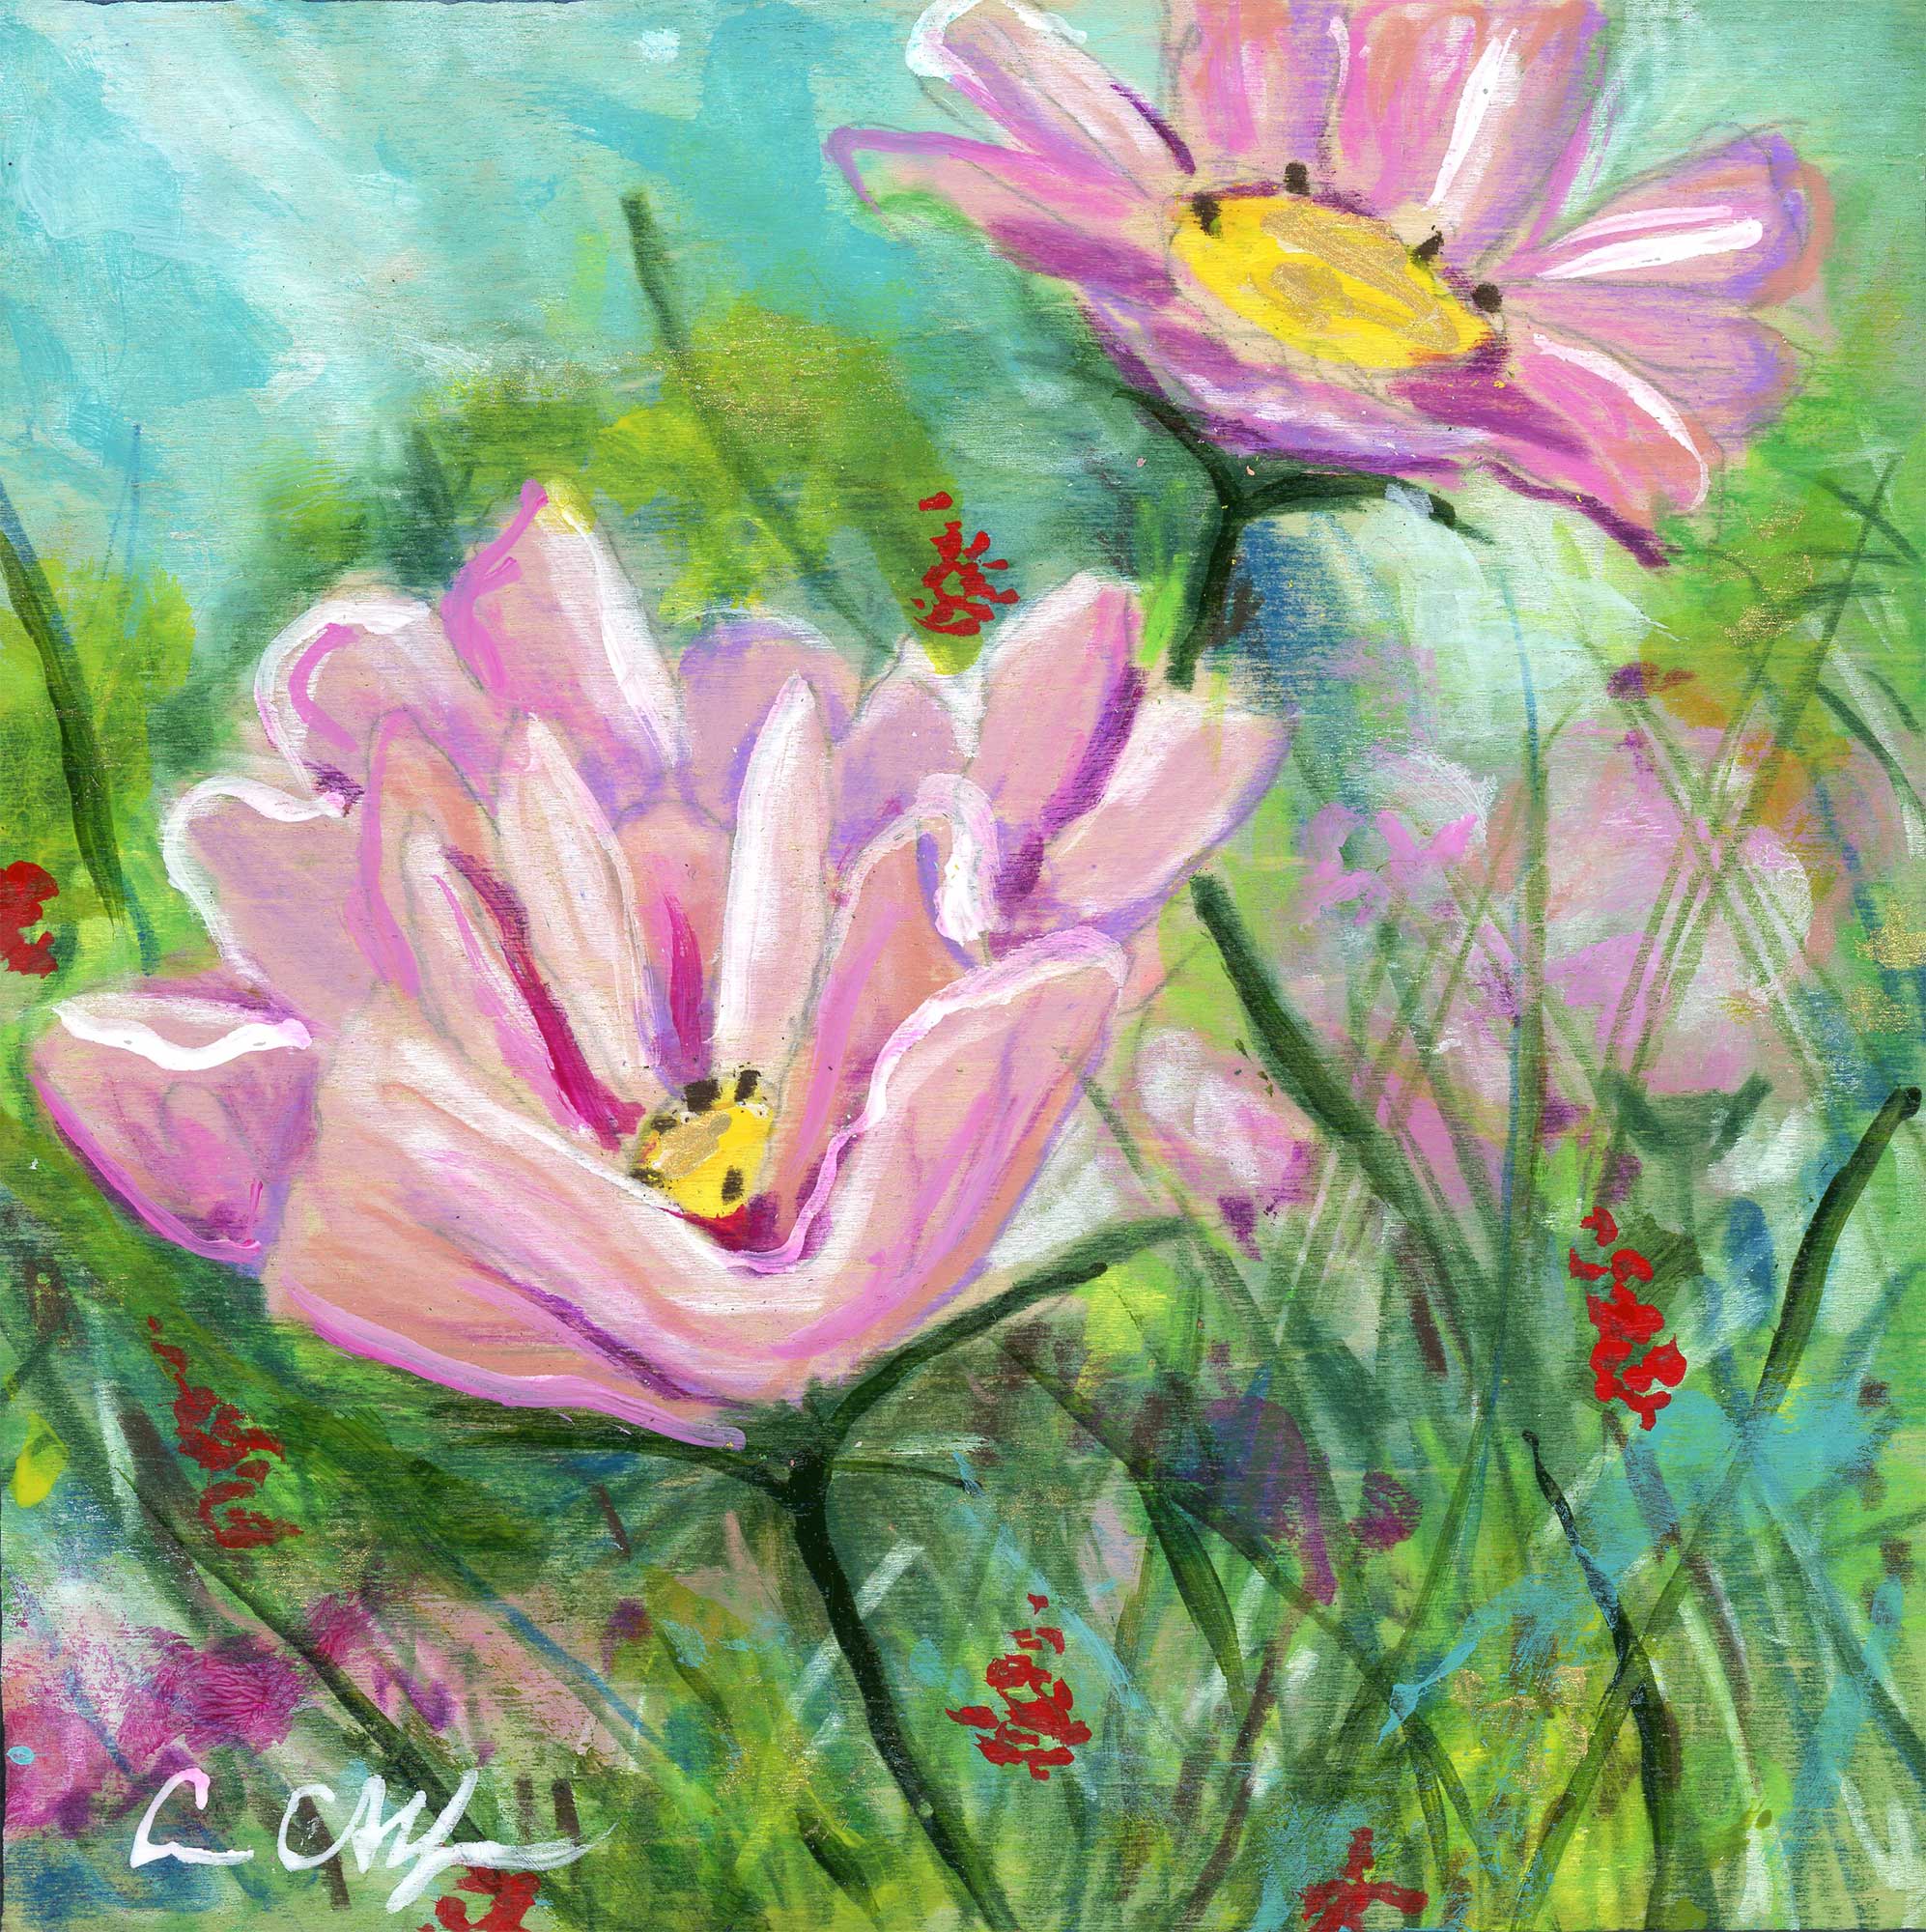 SOLD - "Pink Cosmos", 4" x 4", mixed media